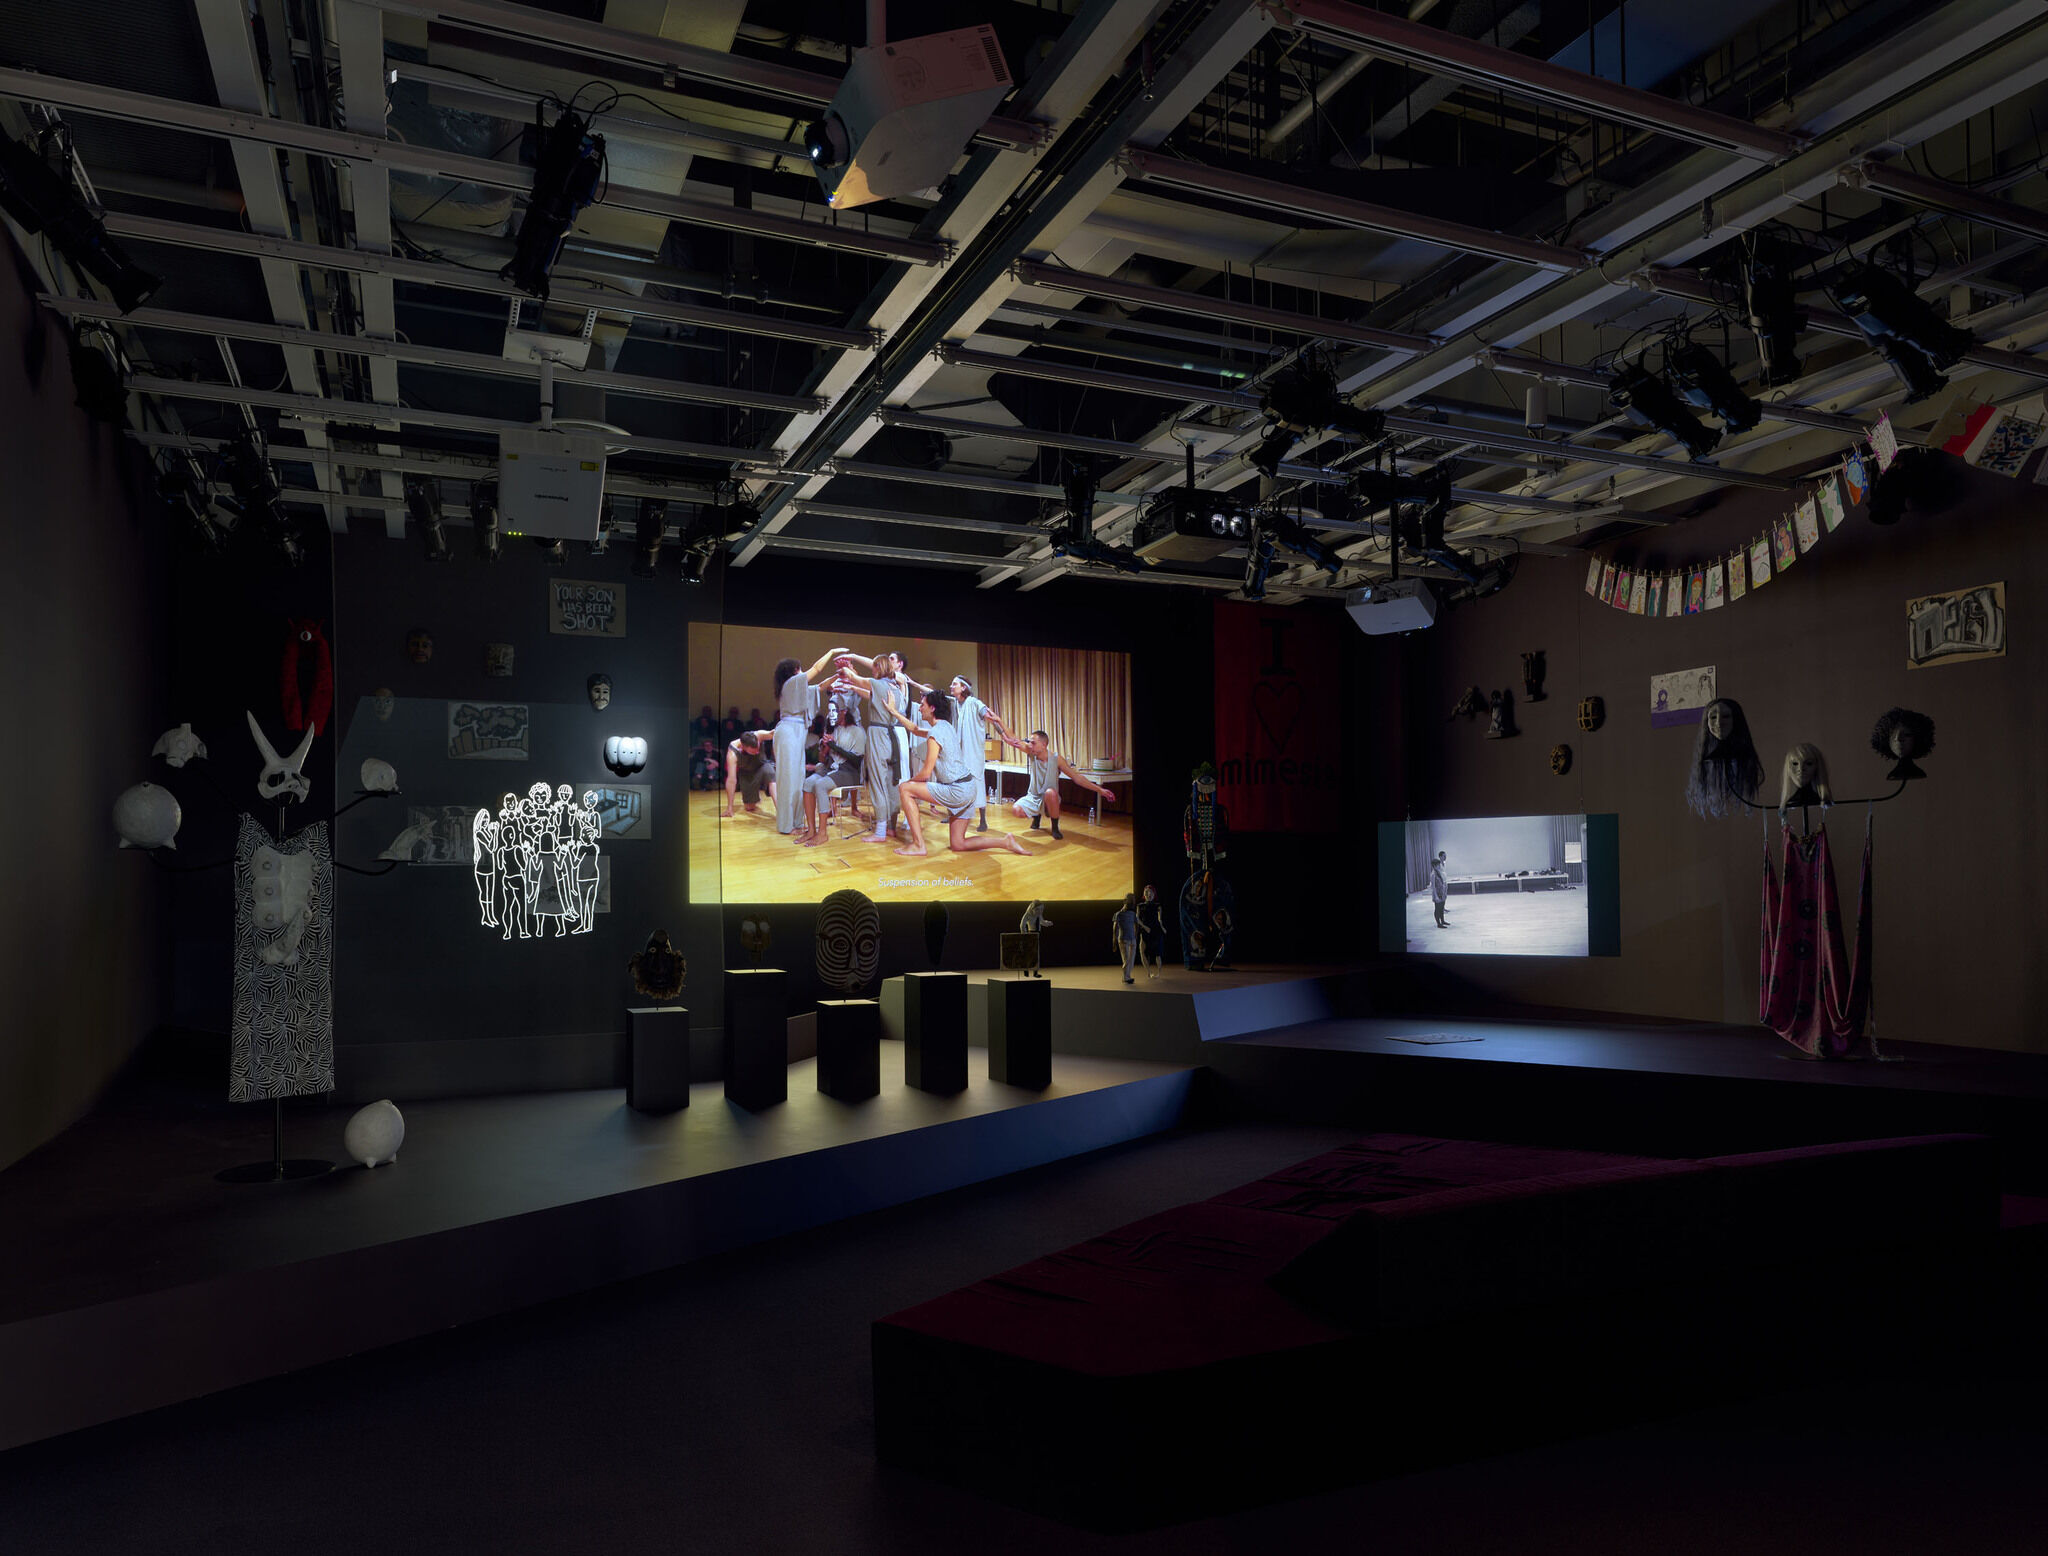 A dark exhibition room featuring a large digital screen and a series of smaller pieces installed throughout.